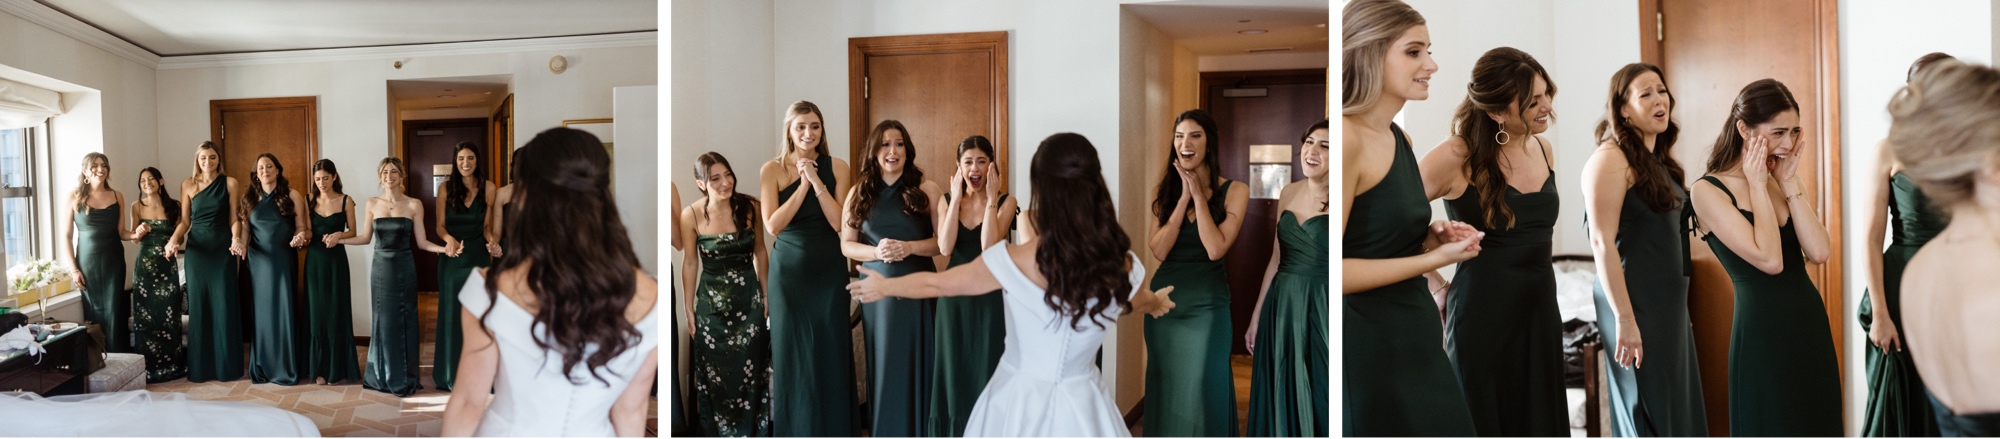 first look with the bride and bridesmaids